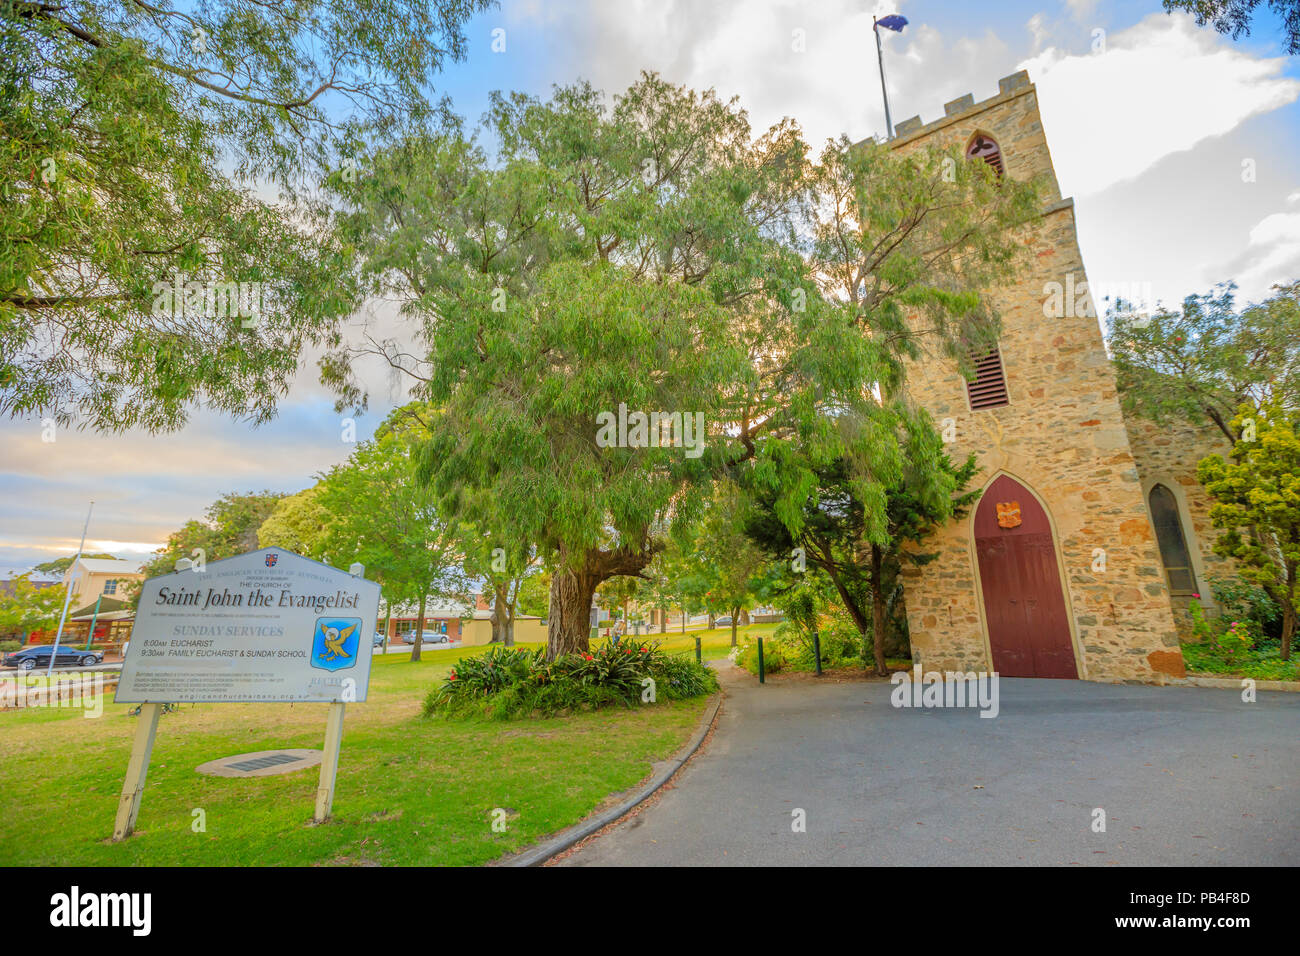 Albany, Australia - Dec 28, 2017: St. John the Evangelist Anglican Church at twilight, on York Street in Albany, the oldest church to be consecrated in Western Australia. Construction began in 1841. Stock Photo